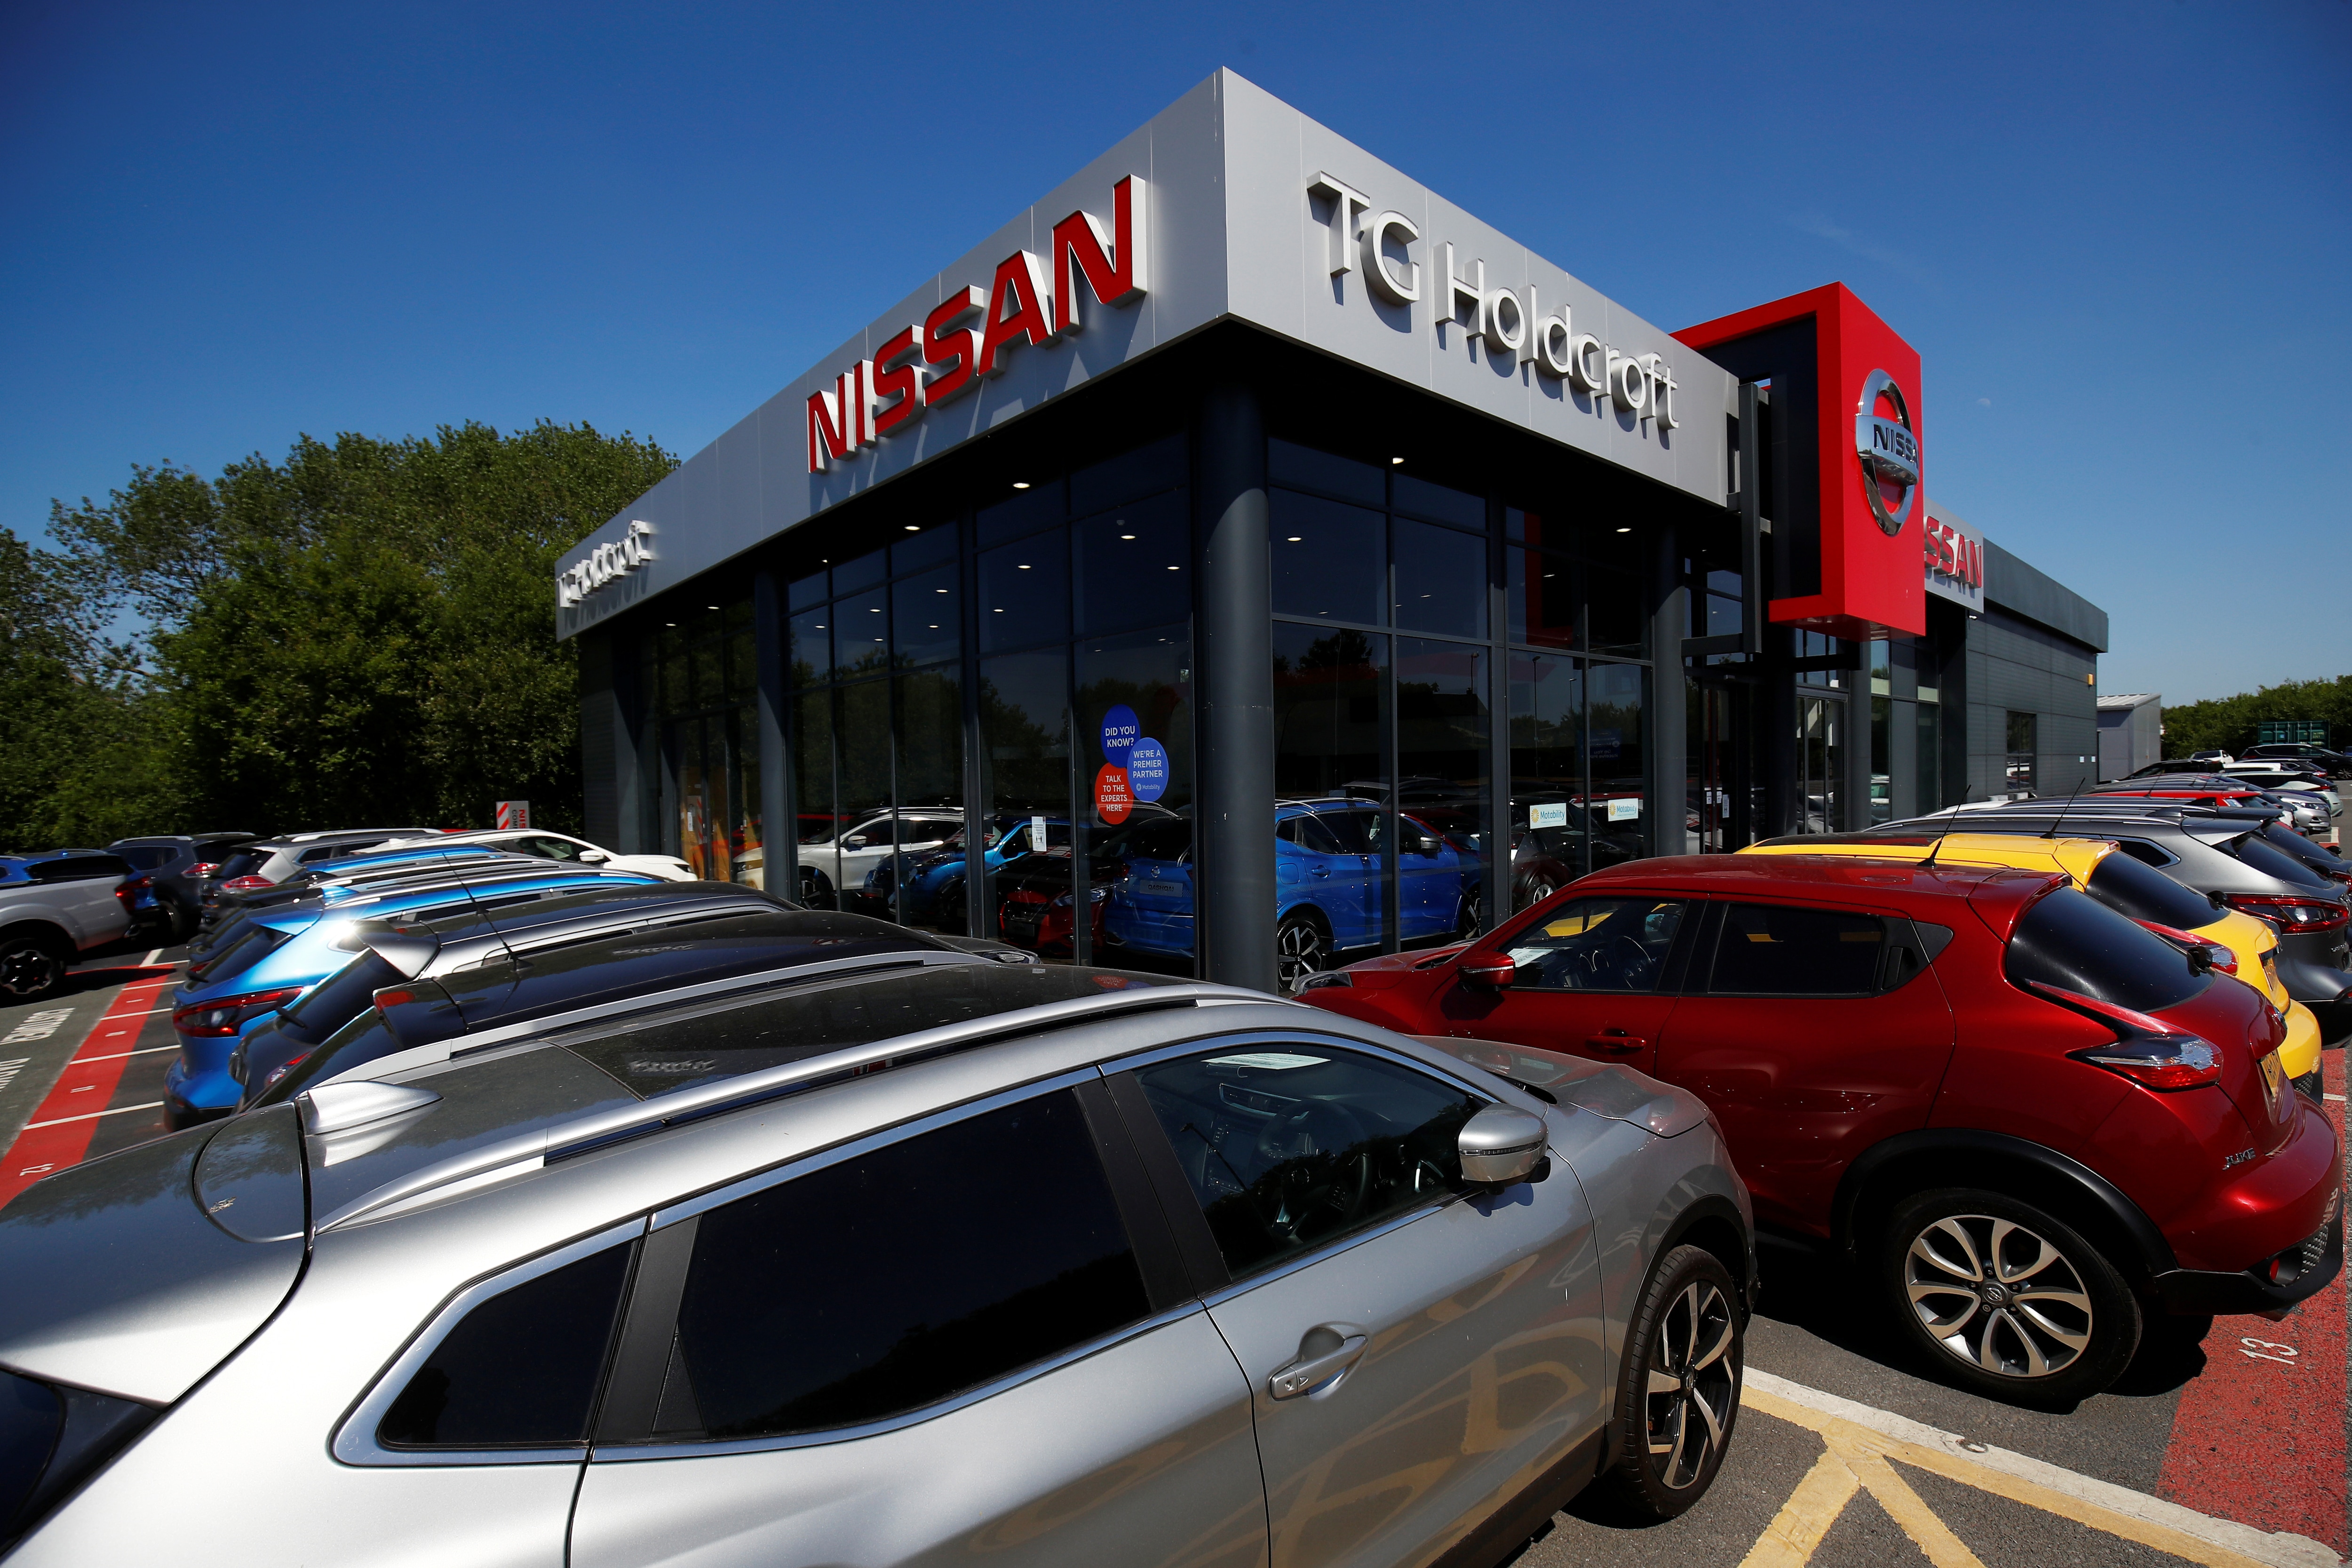 A Nissan car dealership is pictured in Northwich, following the outbreak of the coronavirus disease (COVID-19), Northwich, Britain.